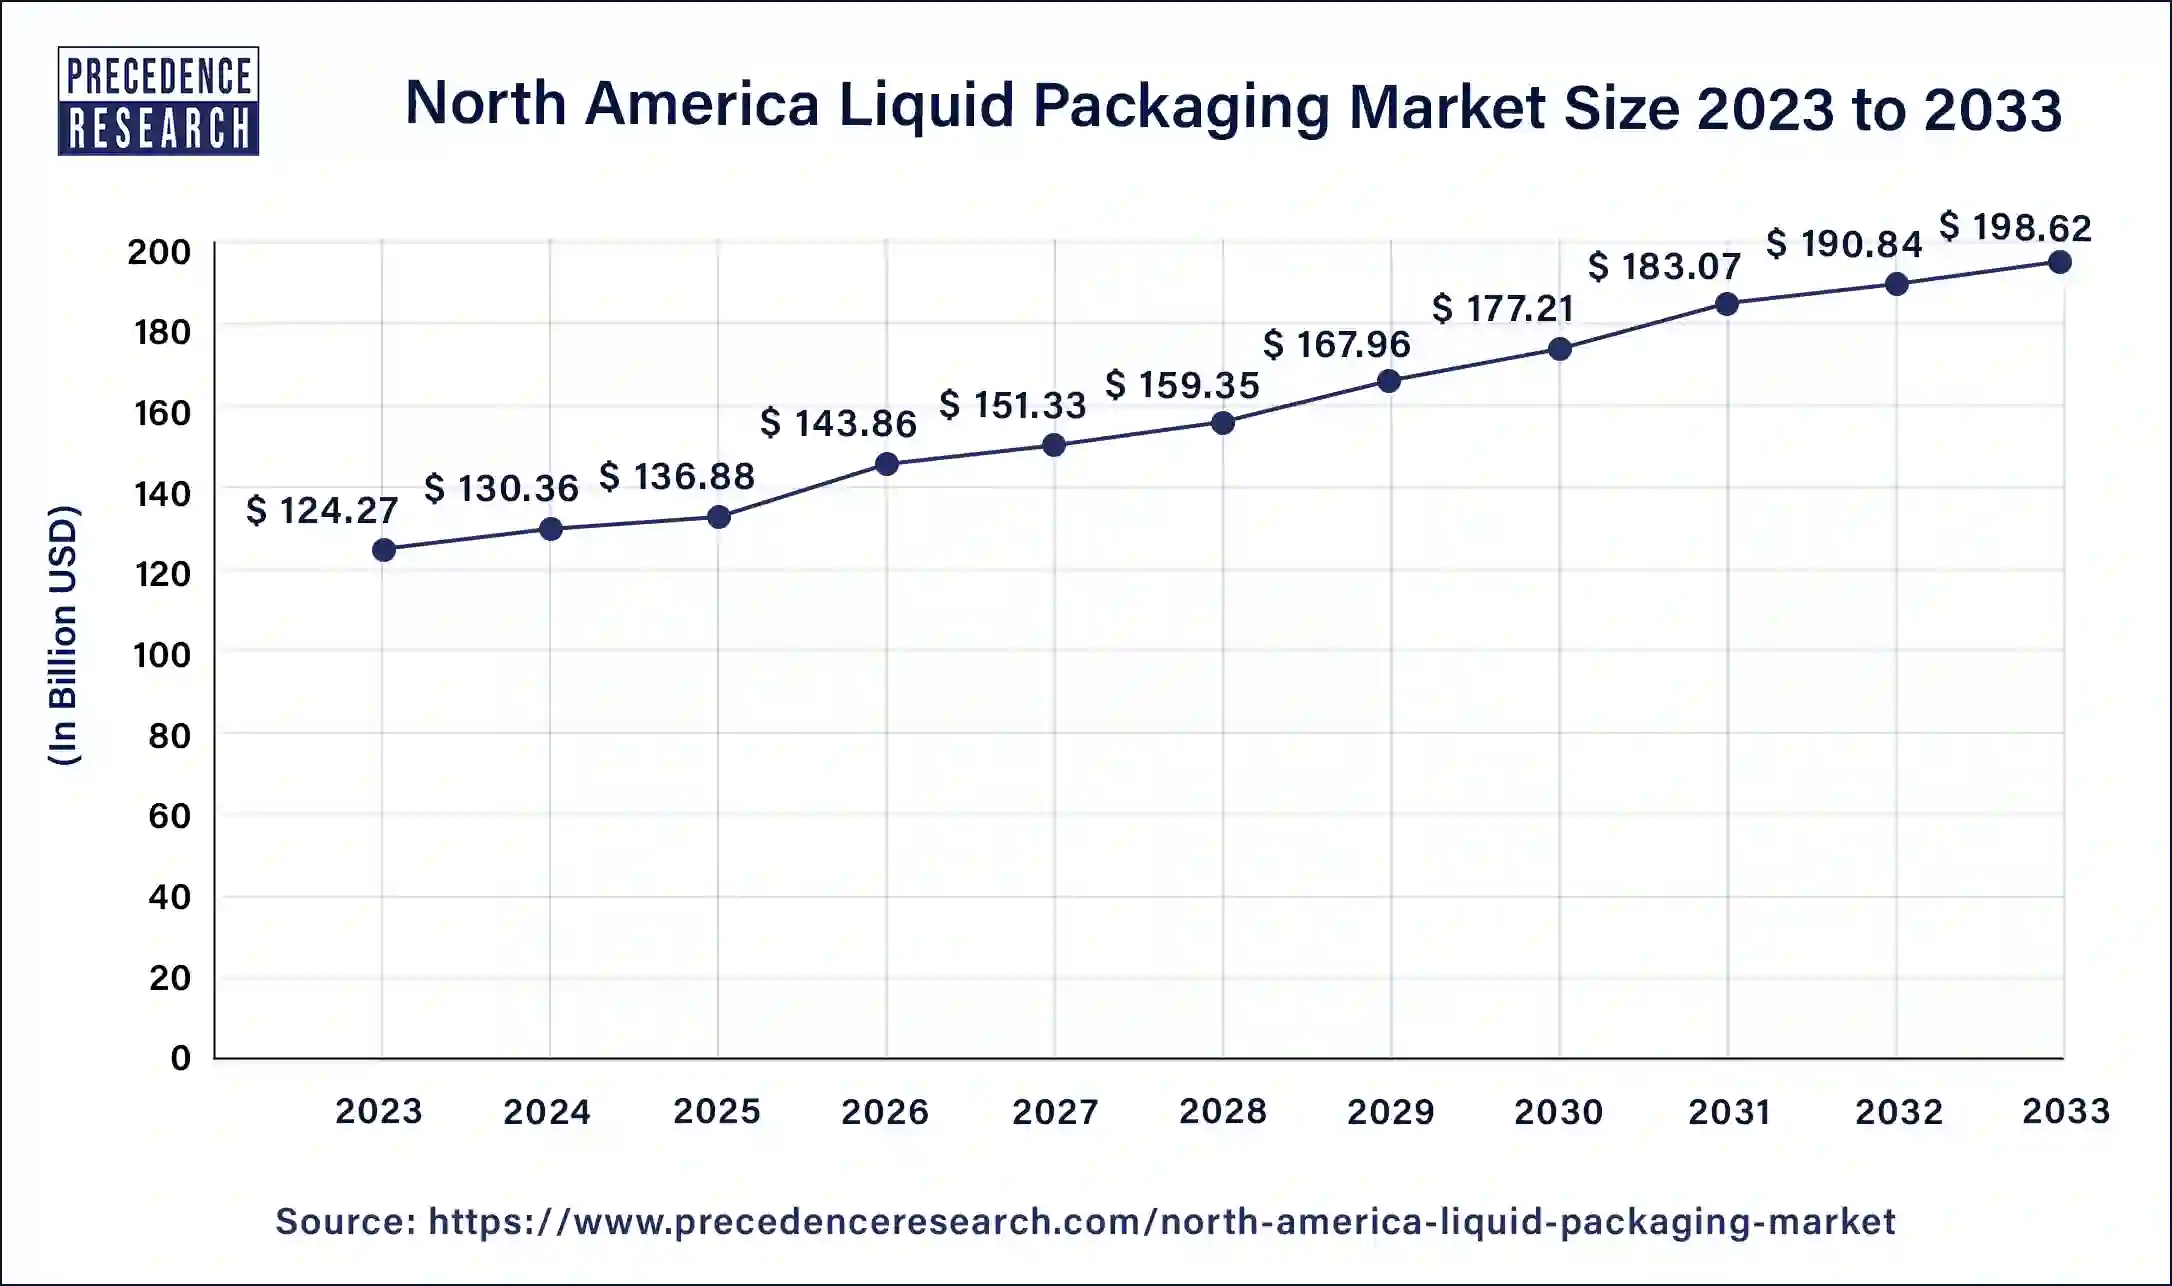 North America Liquid Packaging Market Size 2024 to 2033